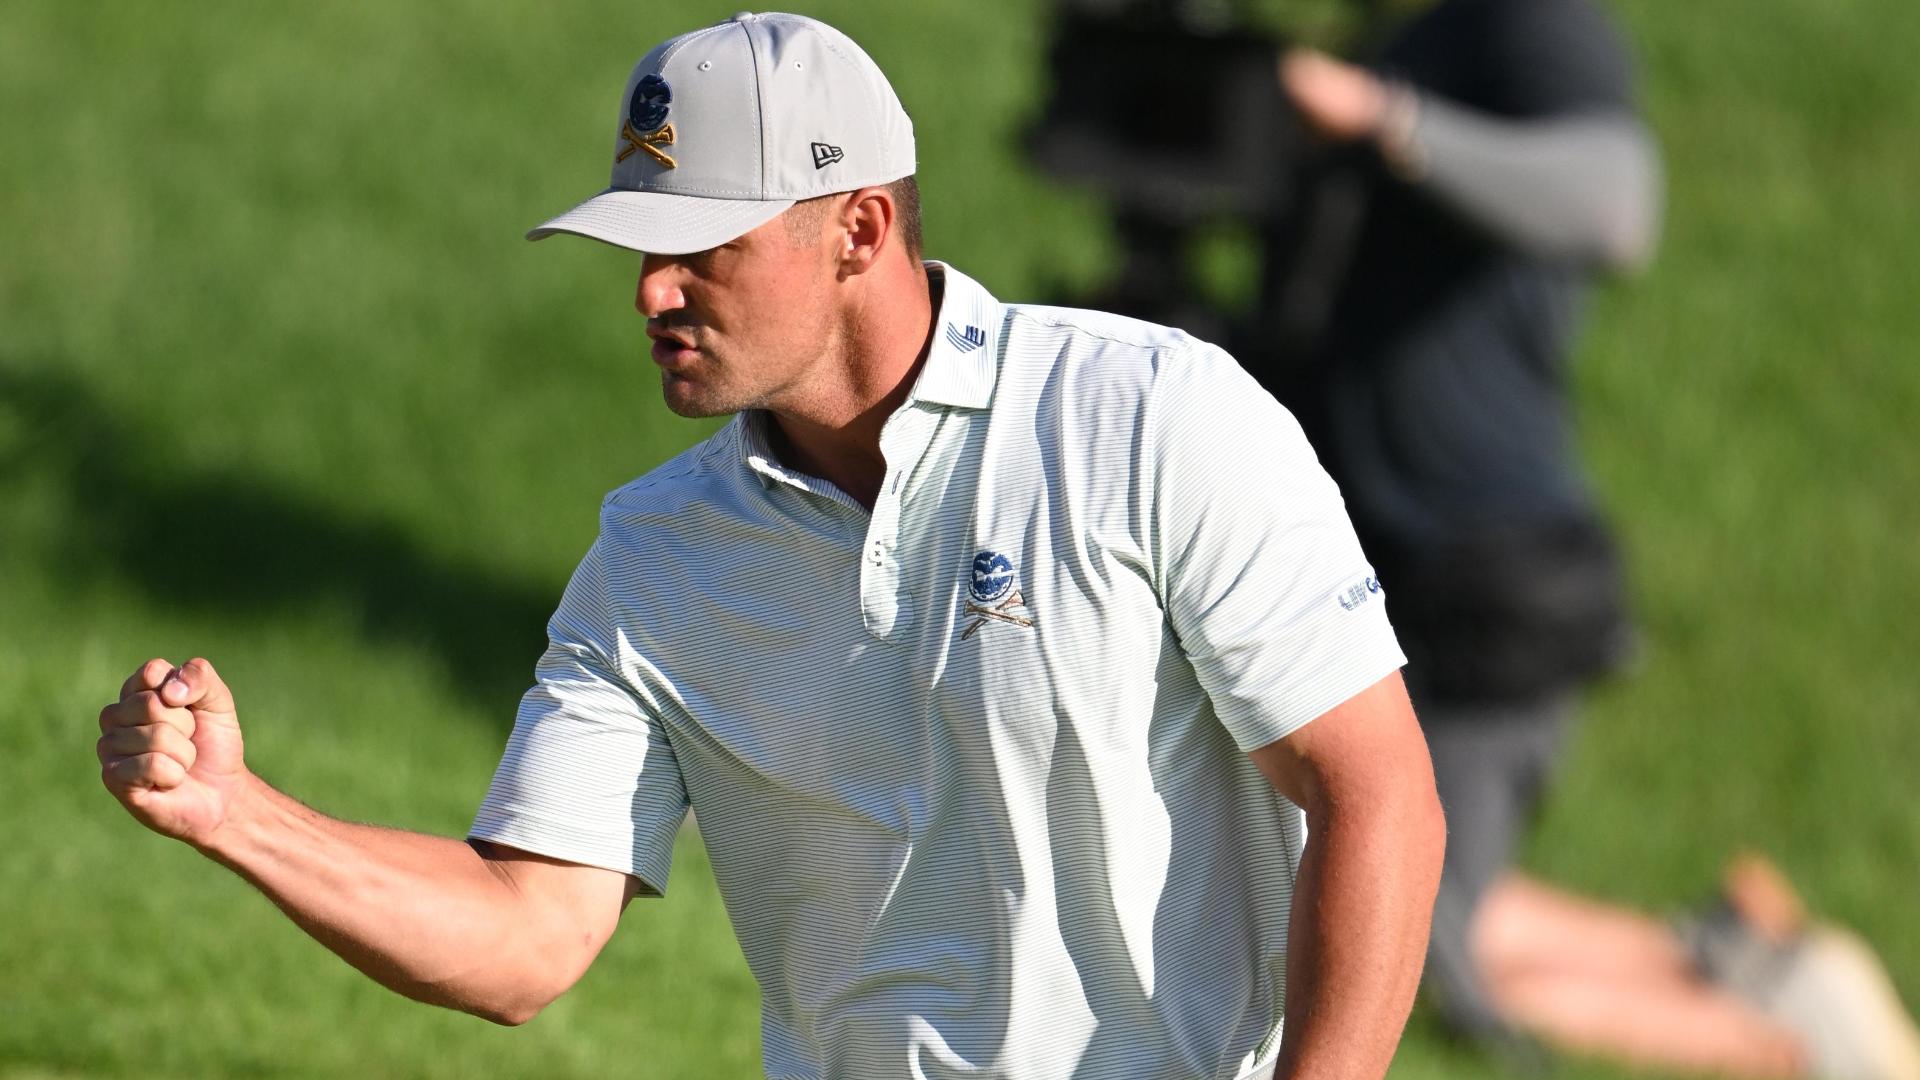 Bryson DeChambeau chips in for eagle, climbs to one back of the lead